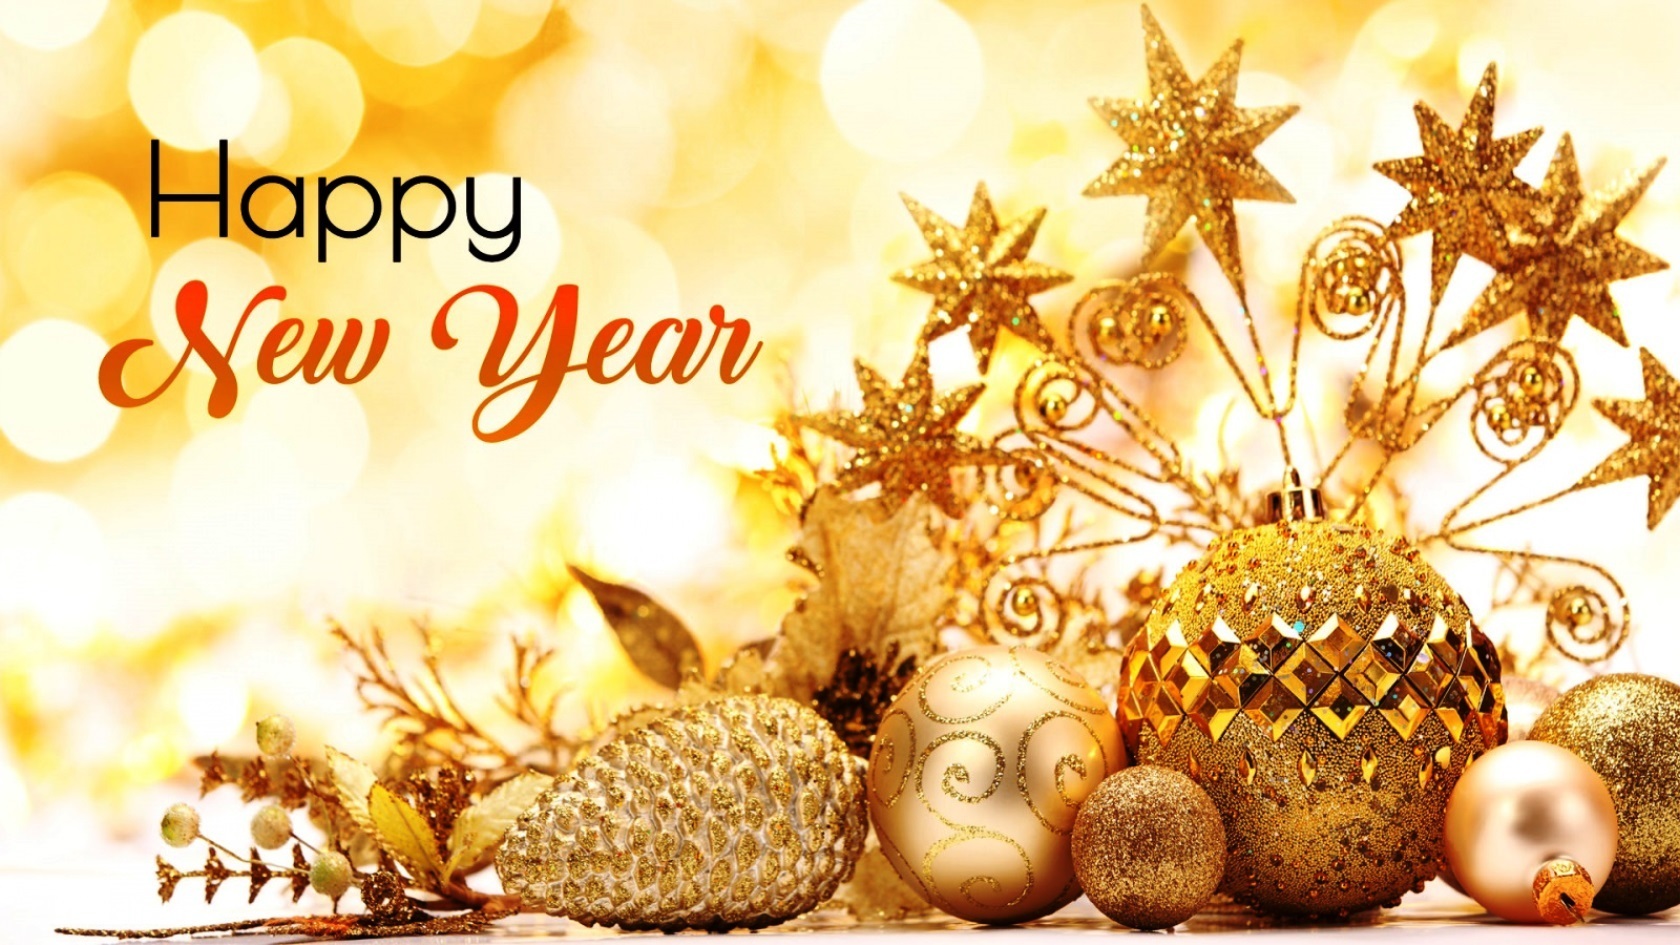 Happy New Year Wallpapers And Greetings (1)